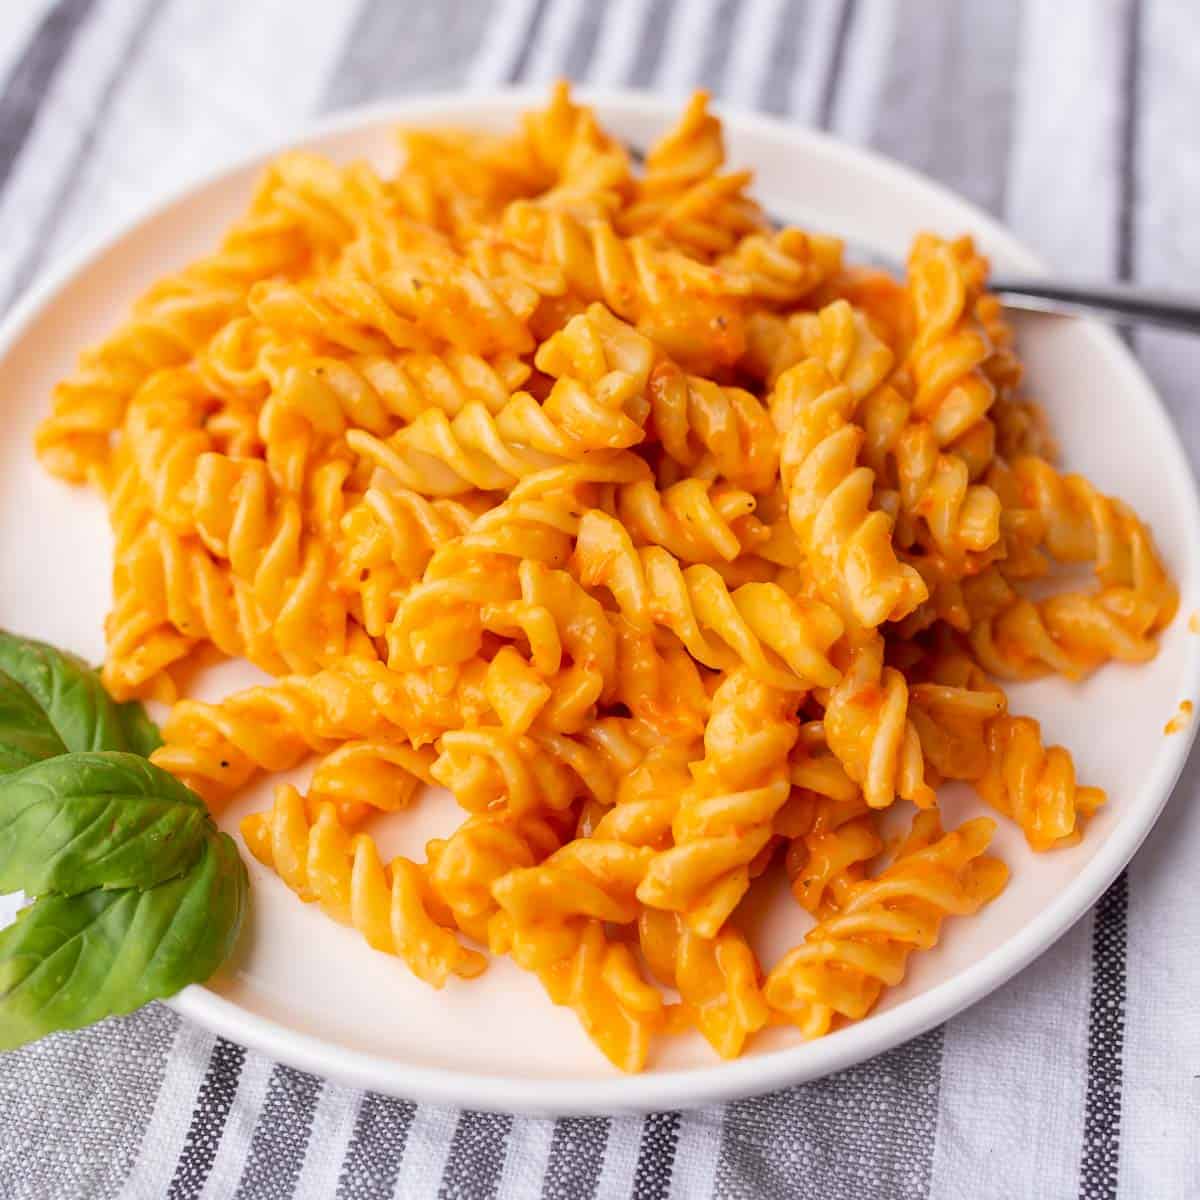 Plate of pasta with creamy roasted red pepper sauce.